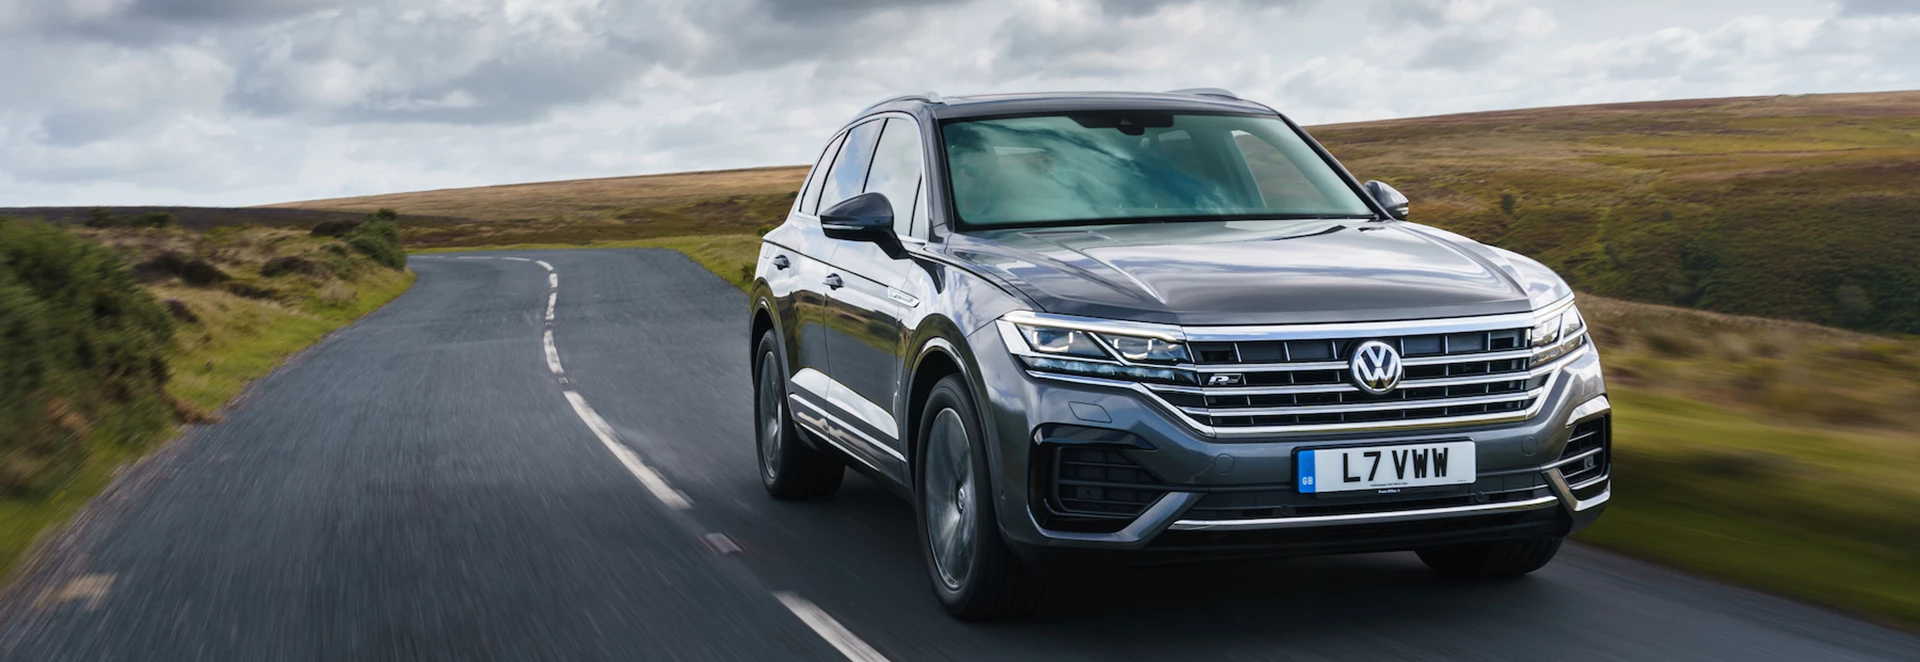 Volkswagen extends 48-hour test drive offer with flagship Touareg